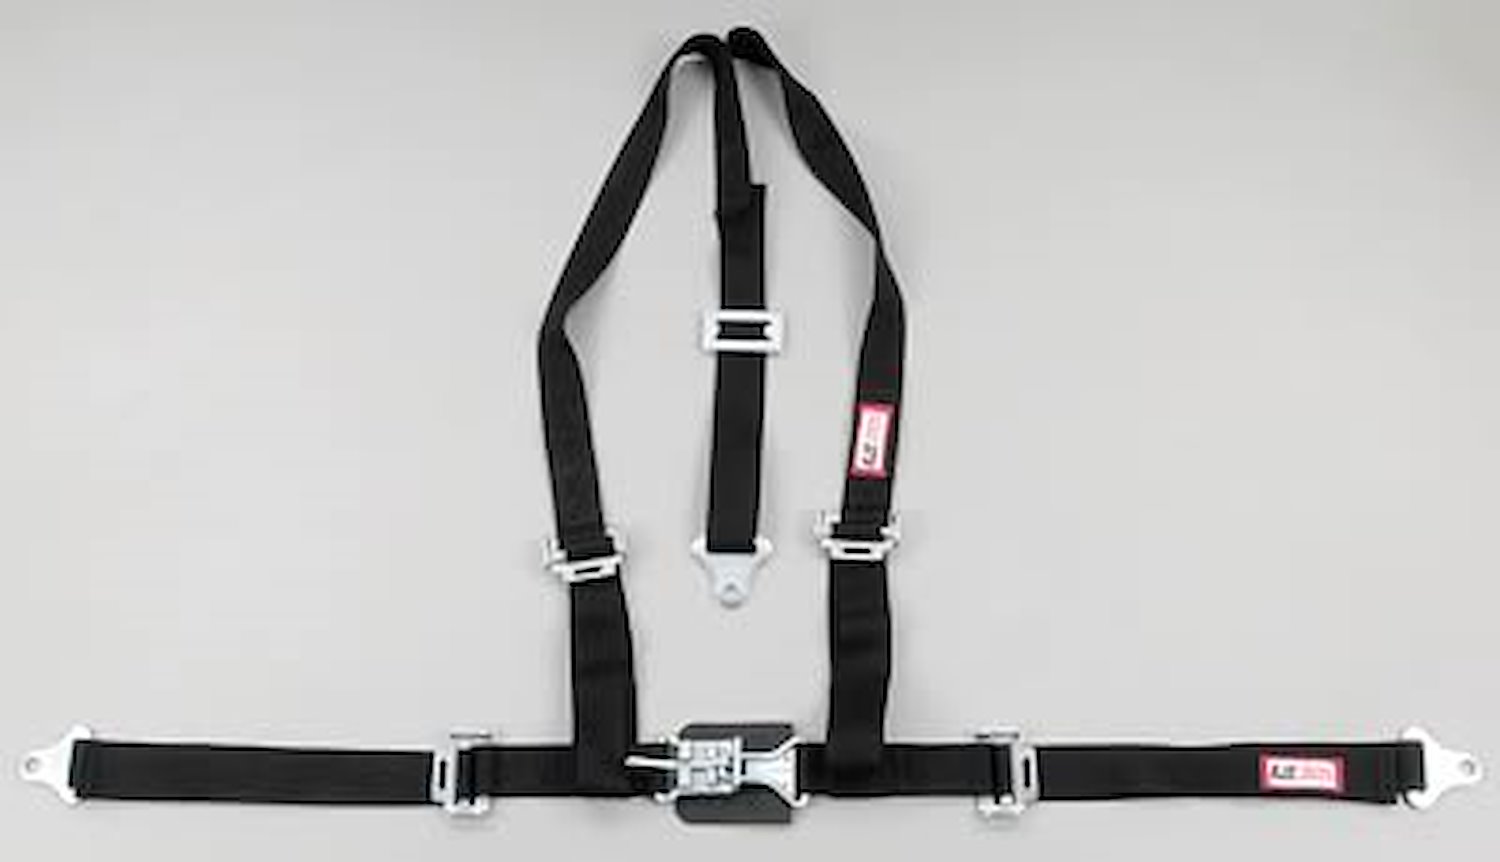 NON-SFI L&L HARNESS 3 PULL UP Lap Belt SEWN IN 2 Shoulder Harness V ROLL BAR Mount w/STERNUM STRAP ALL BOLT ENDS GRAY